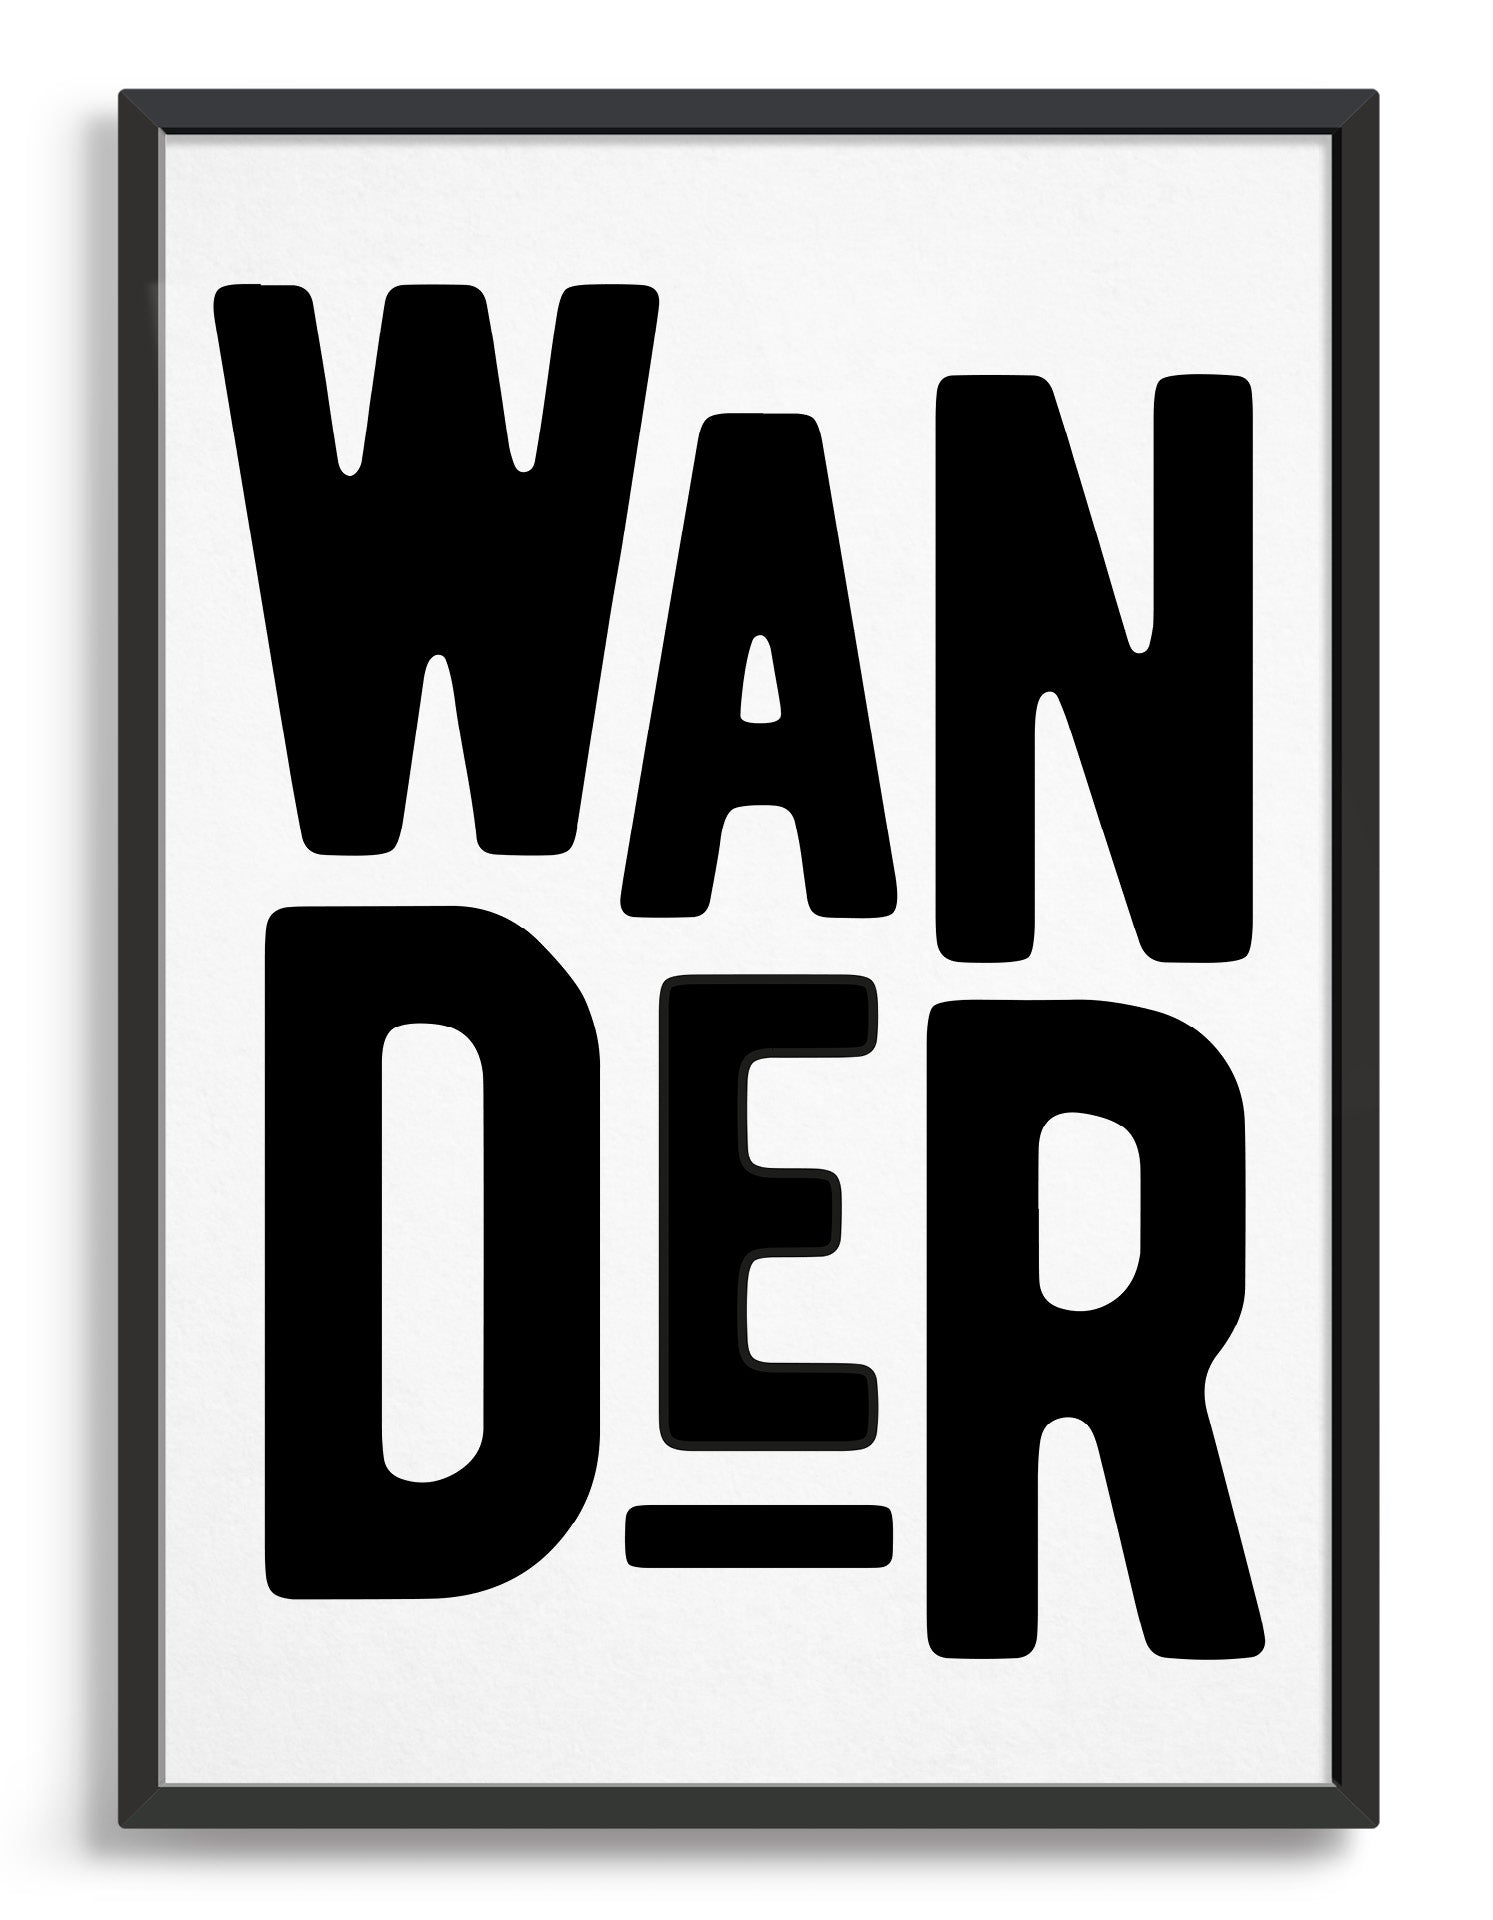 Framed typography art print of the word Wander in black text against a white background